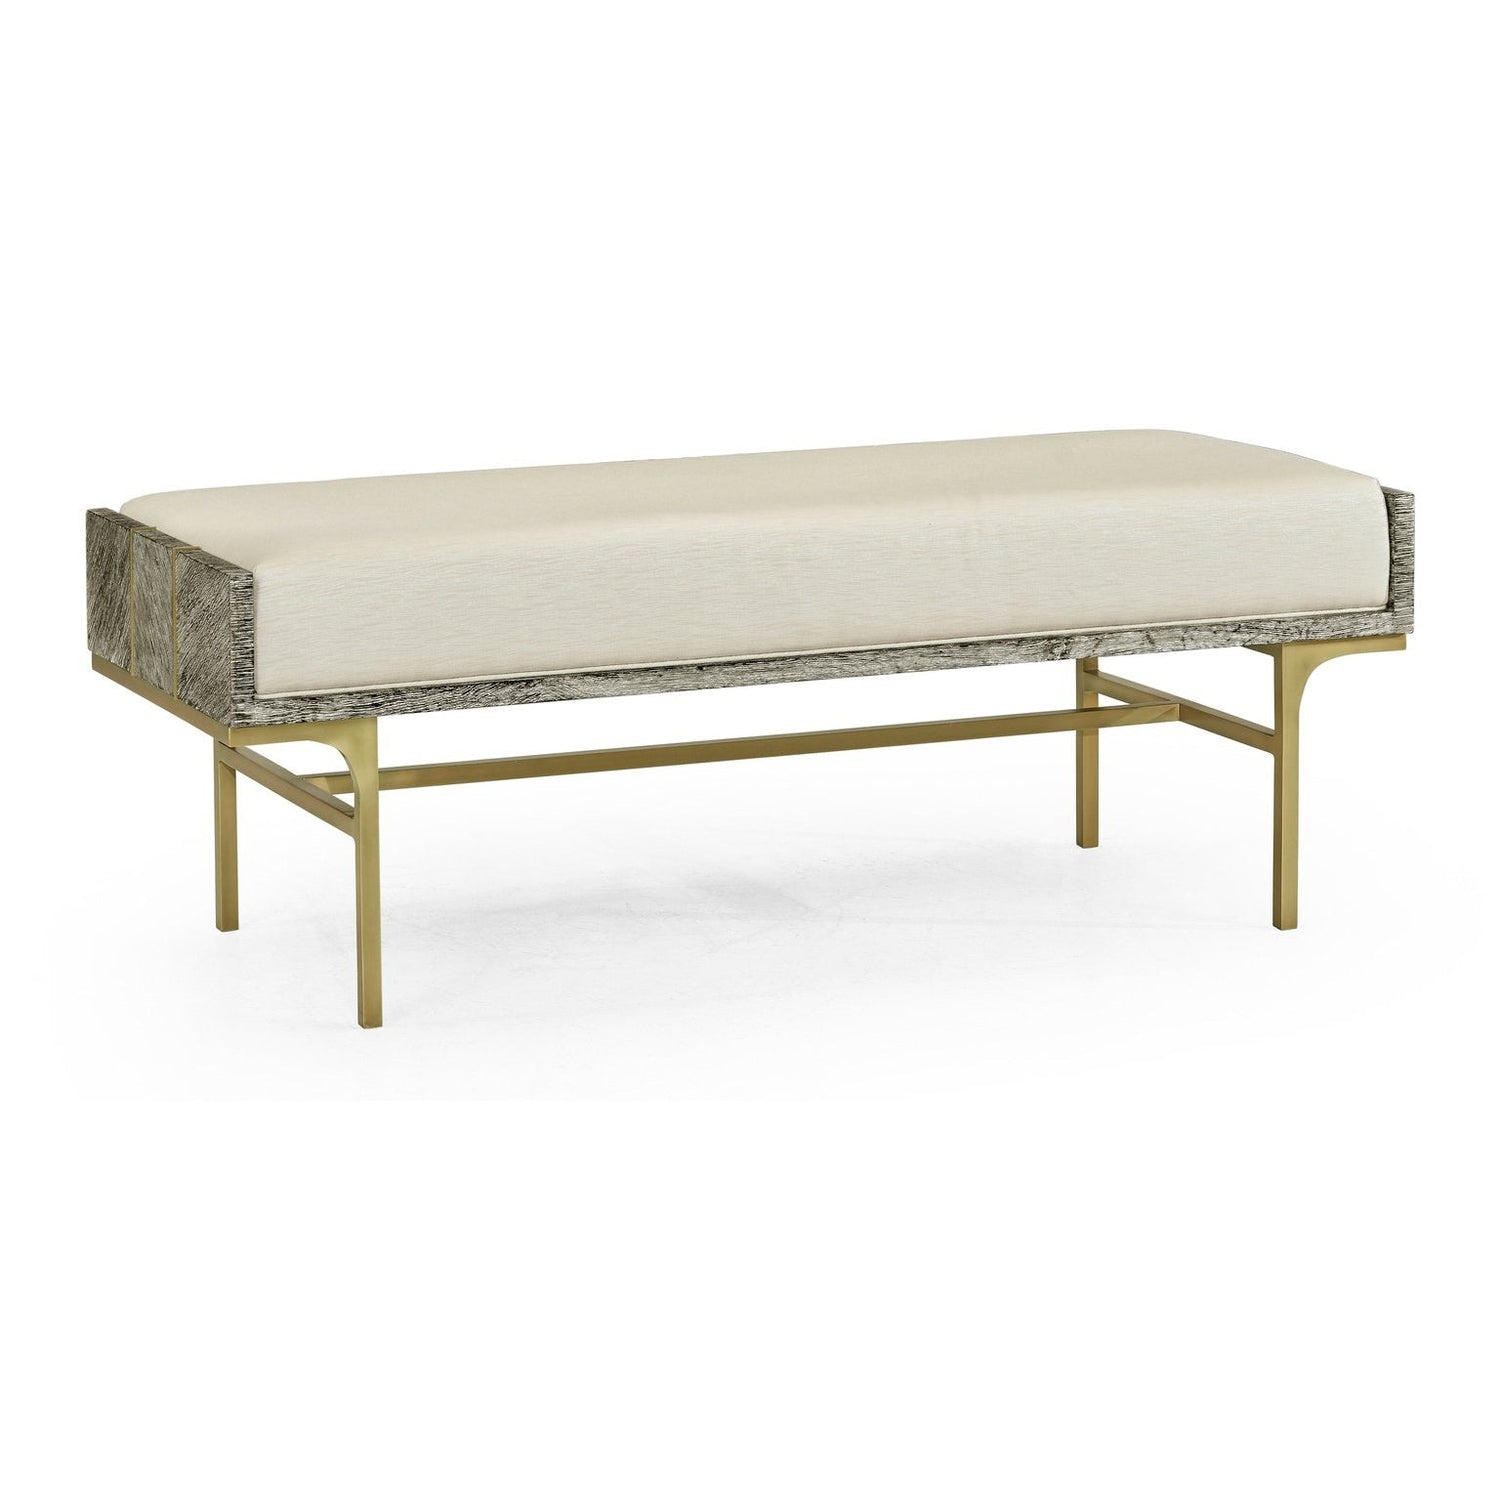 Geometric Bench-Jonathan Charles-JCHARLES-500285-DFO-F300-BenchesF300-2-France and Son